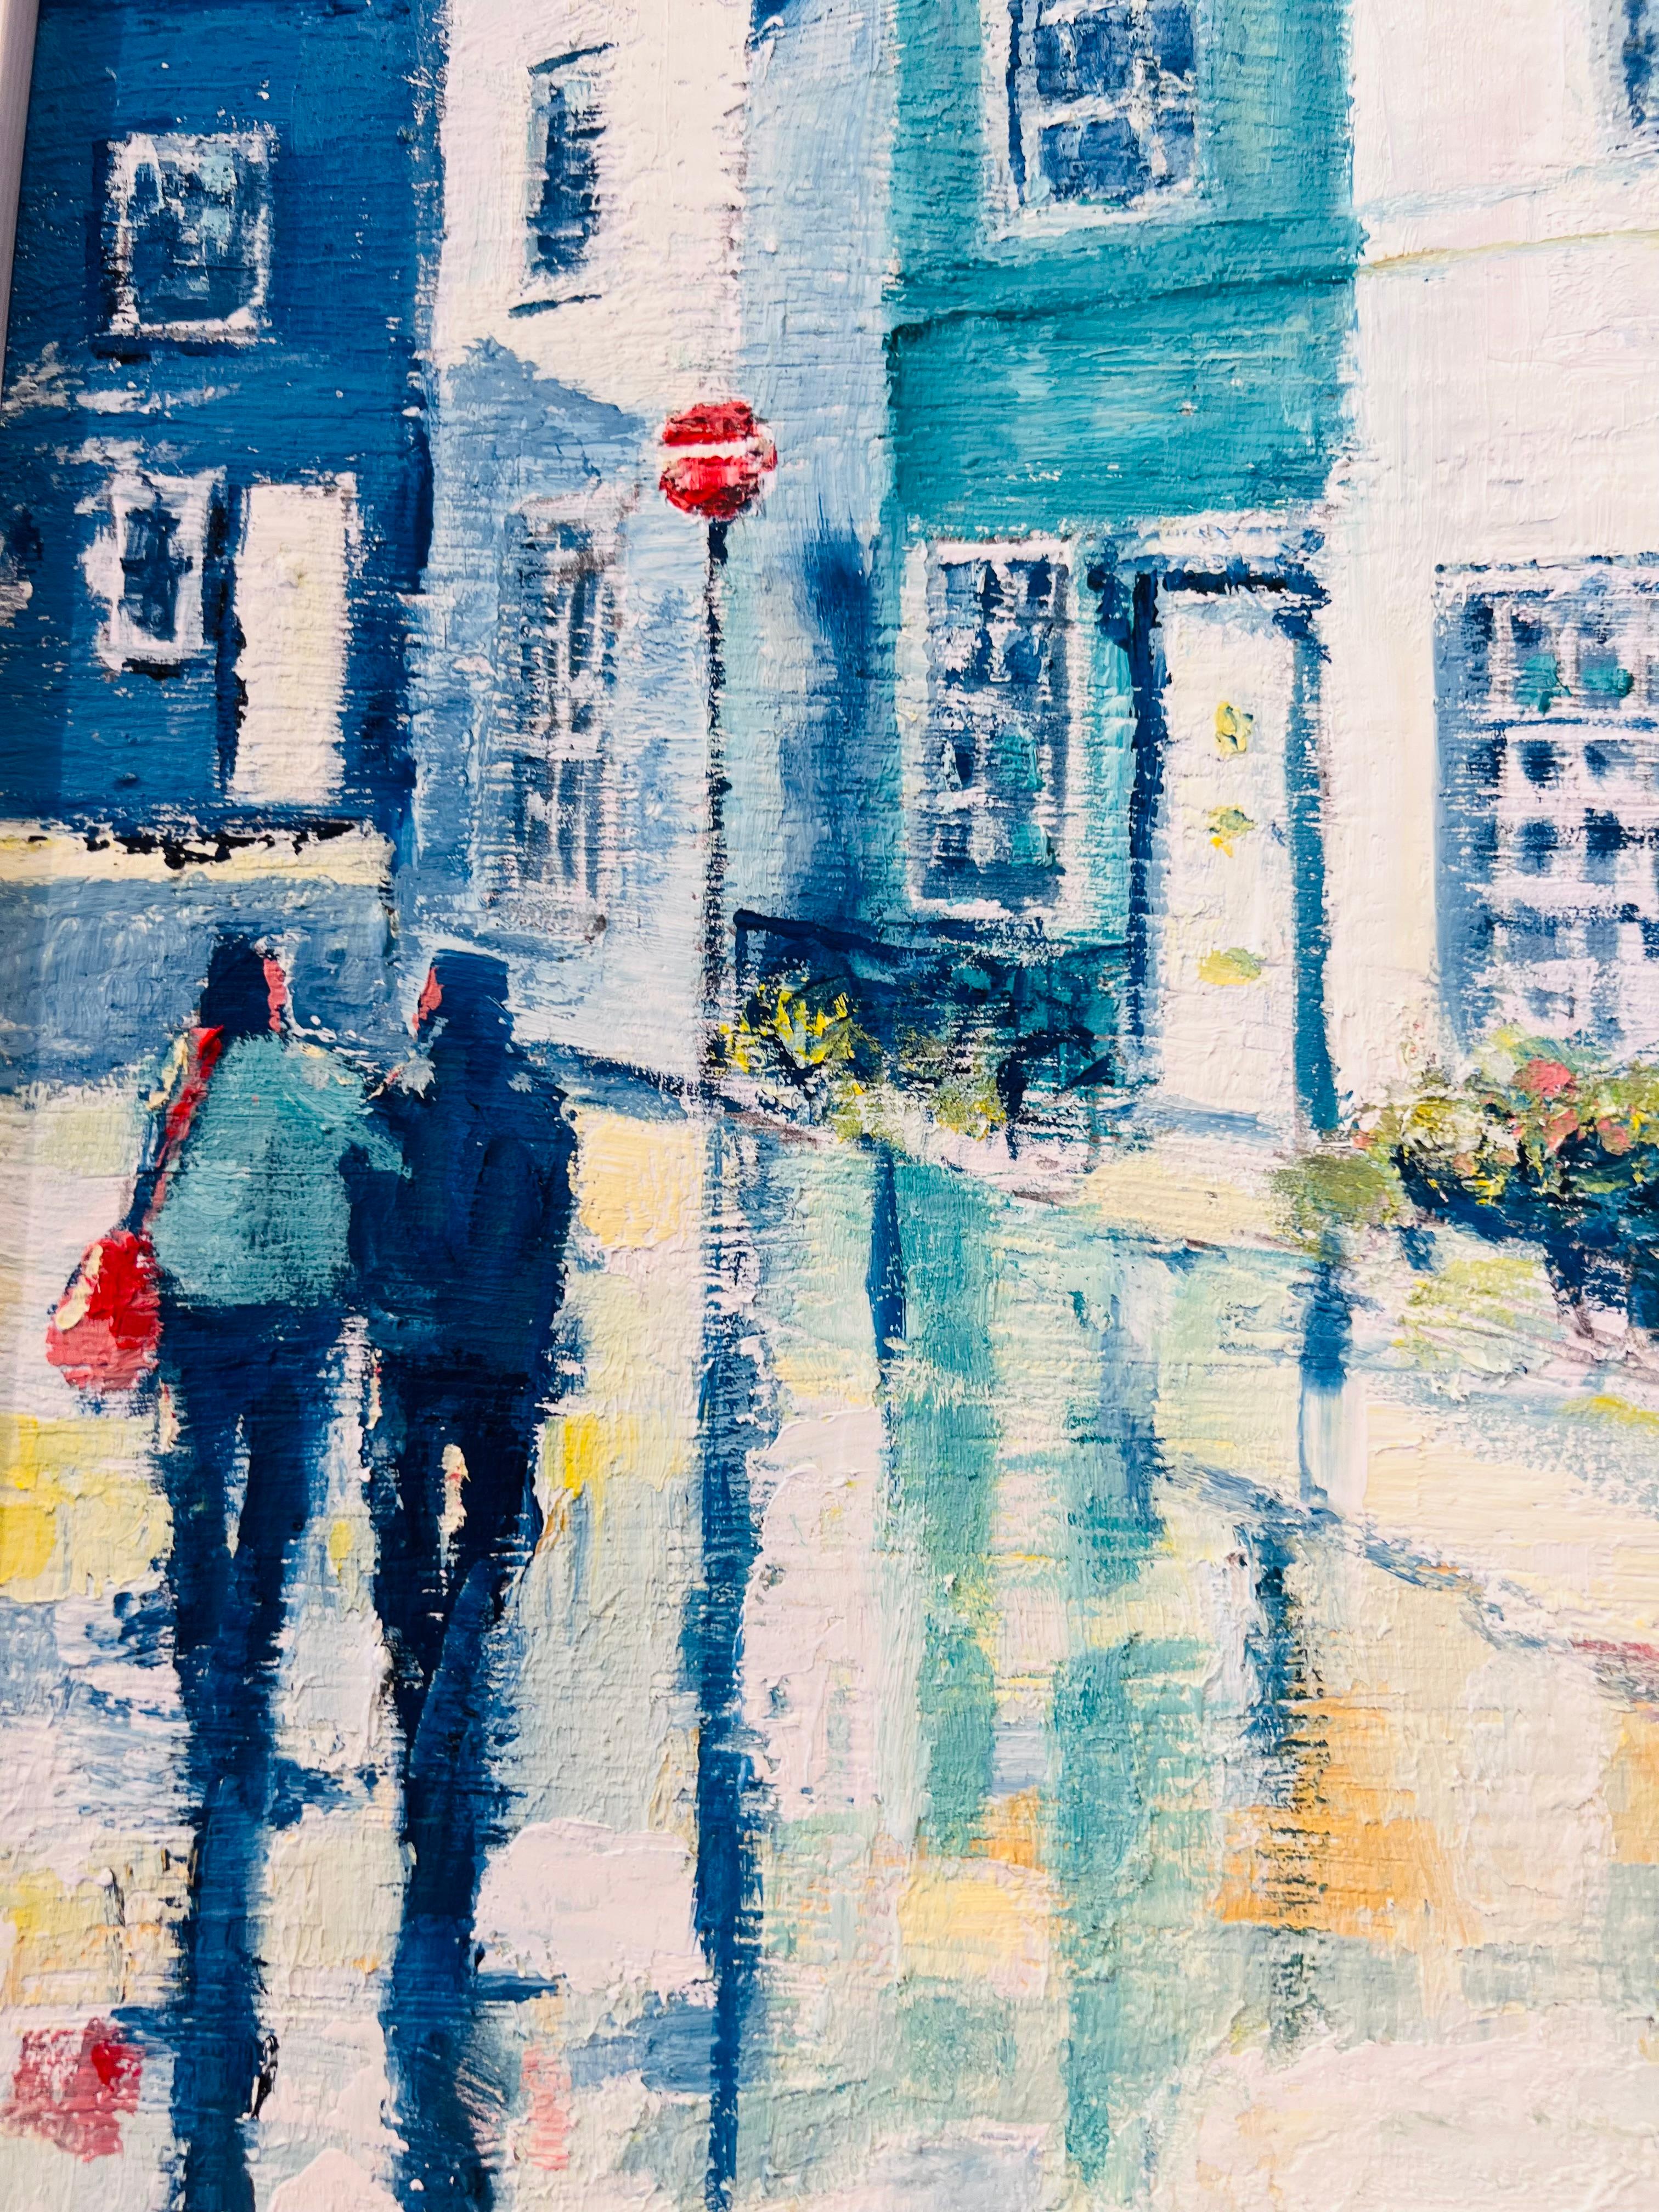 The Colours of Kensington-original impressionism cityscape Oil painting-Art - Gray Figurative Painting by Richard Gower